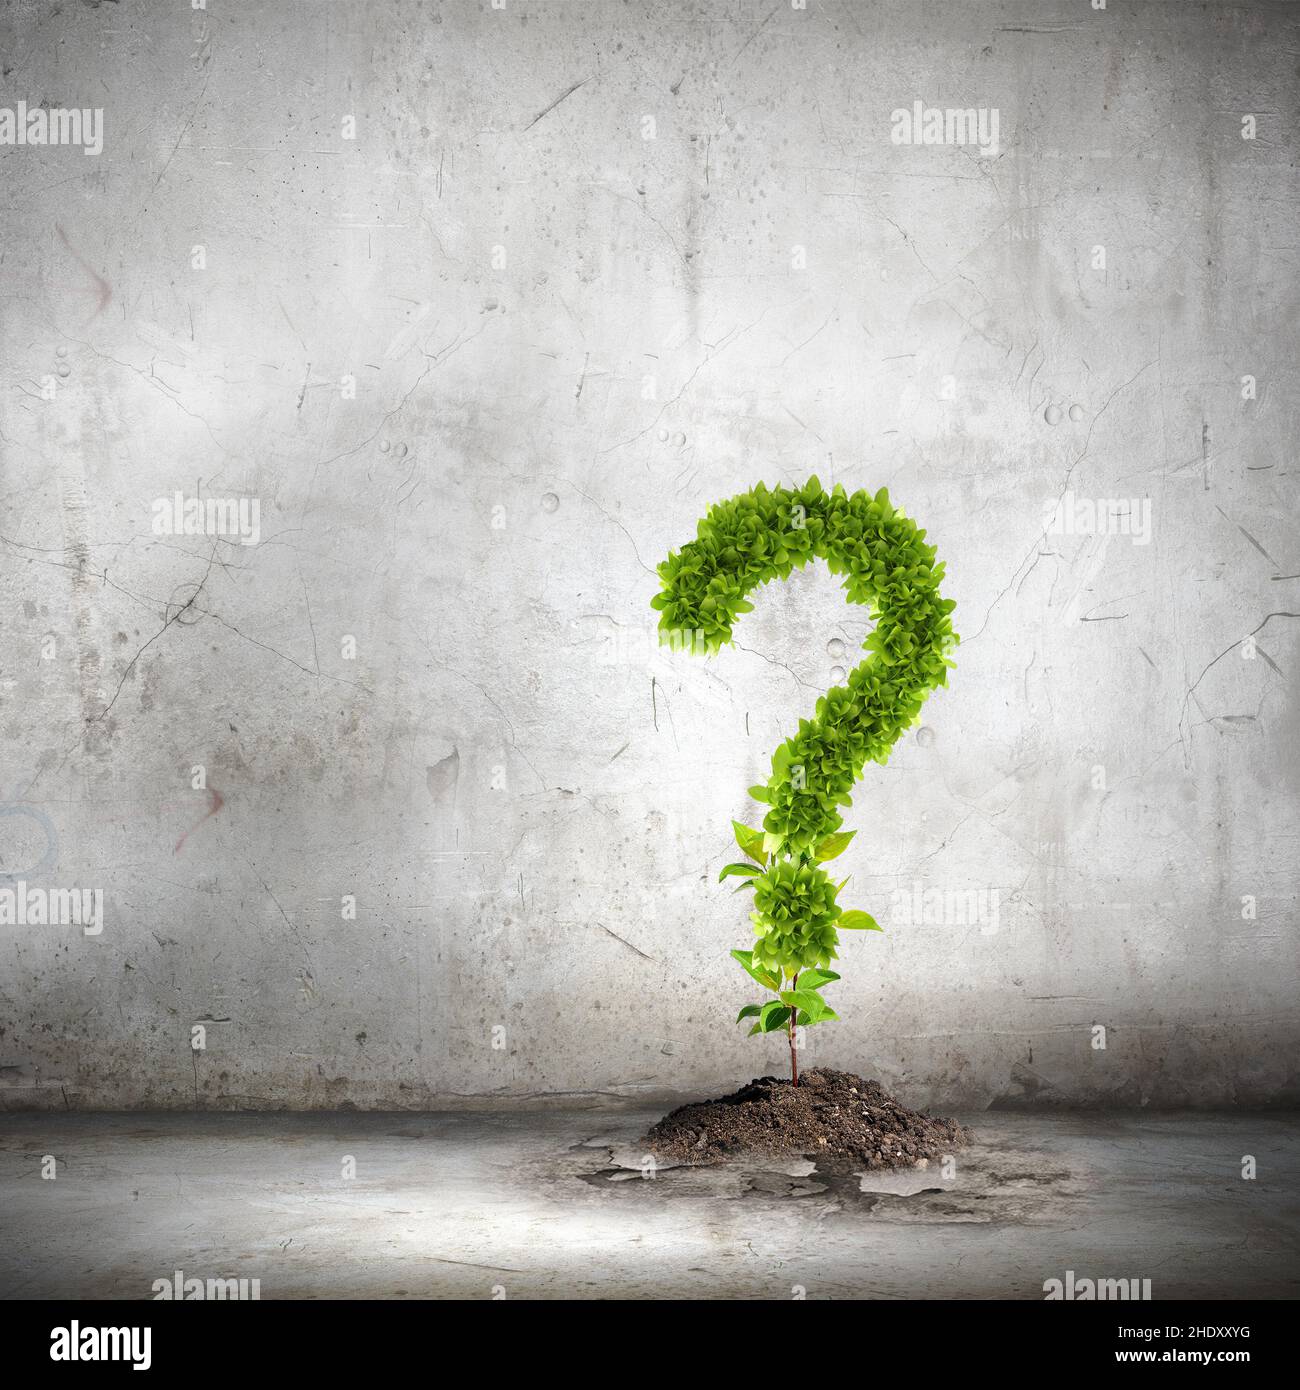 ecology, question mark, environmentalism, ecologies, question marks, environmentalisms Stock Photo